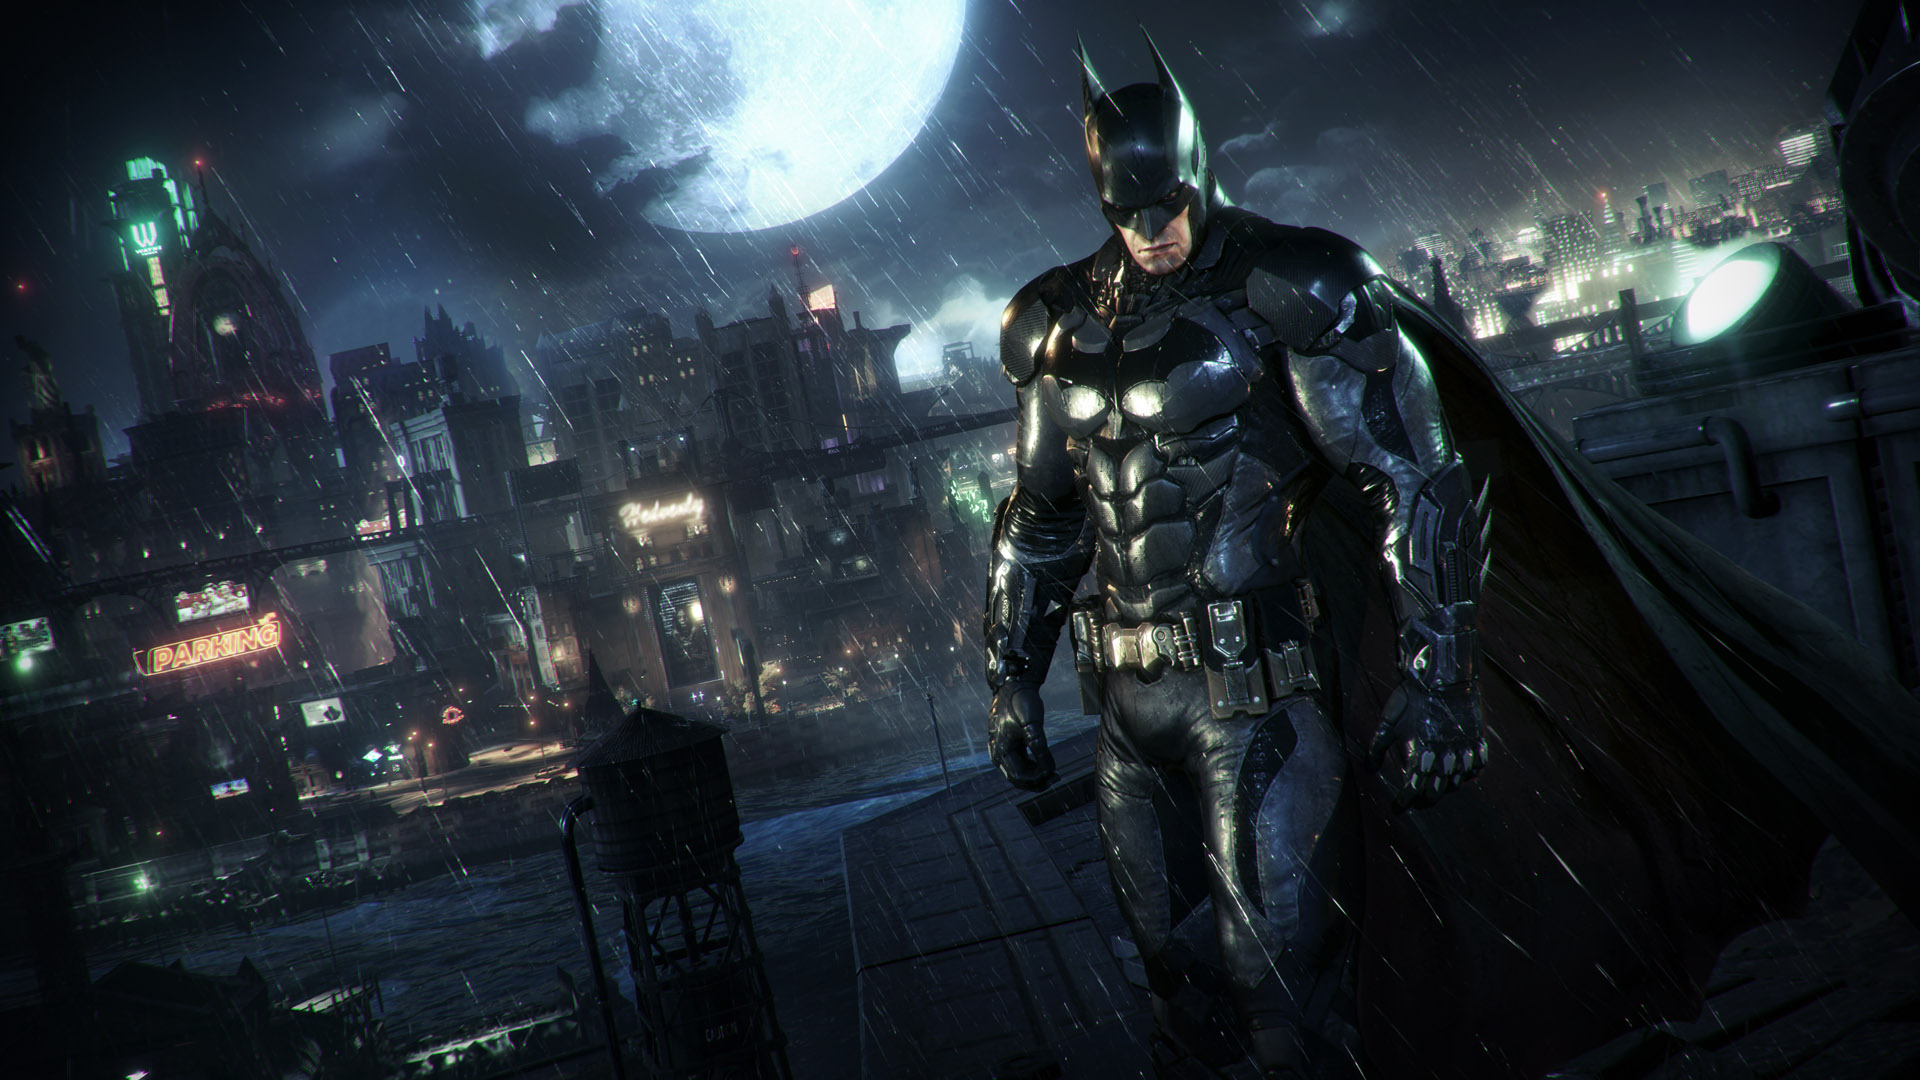 Warner Bros. Interactive Entertainment has announced plans to roll out an "interim" patch addressing issues on the PC version of Rocksteady's "Batman: Arkham Knight" in August.